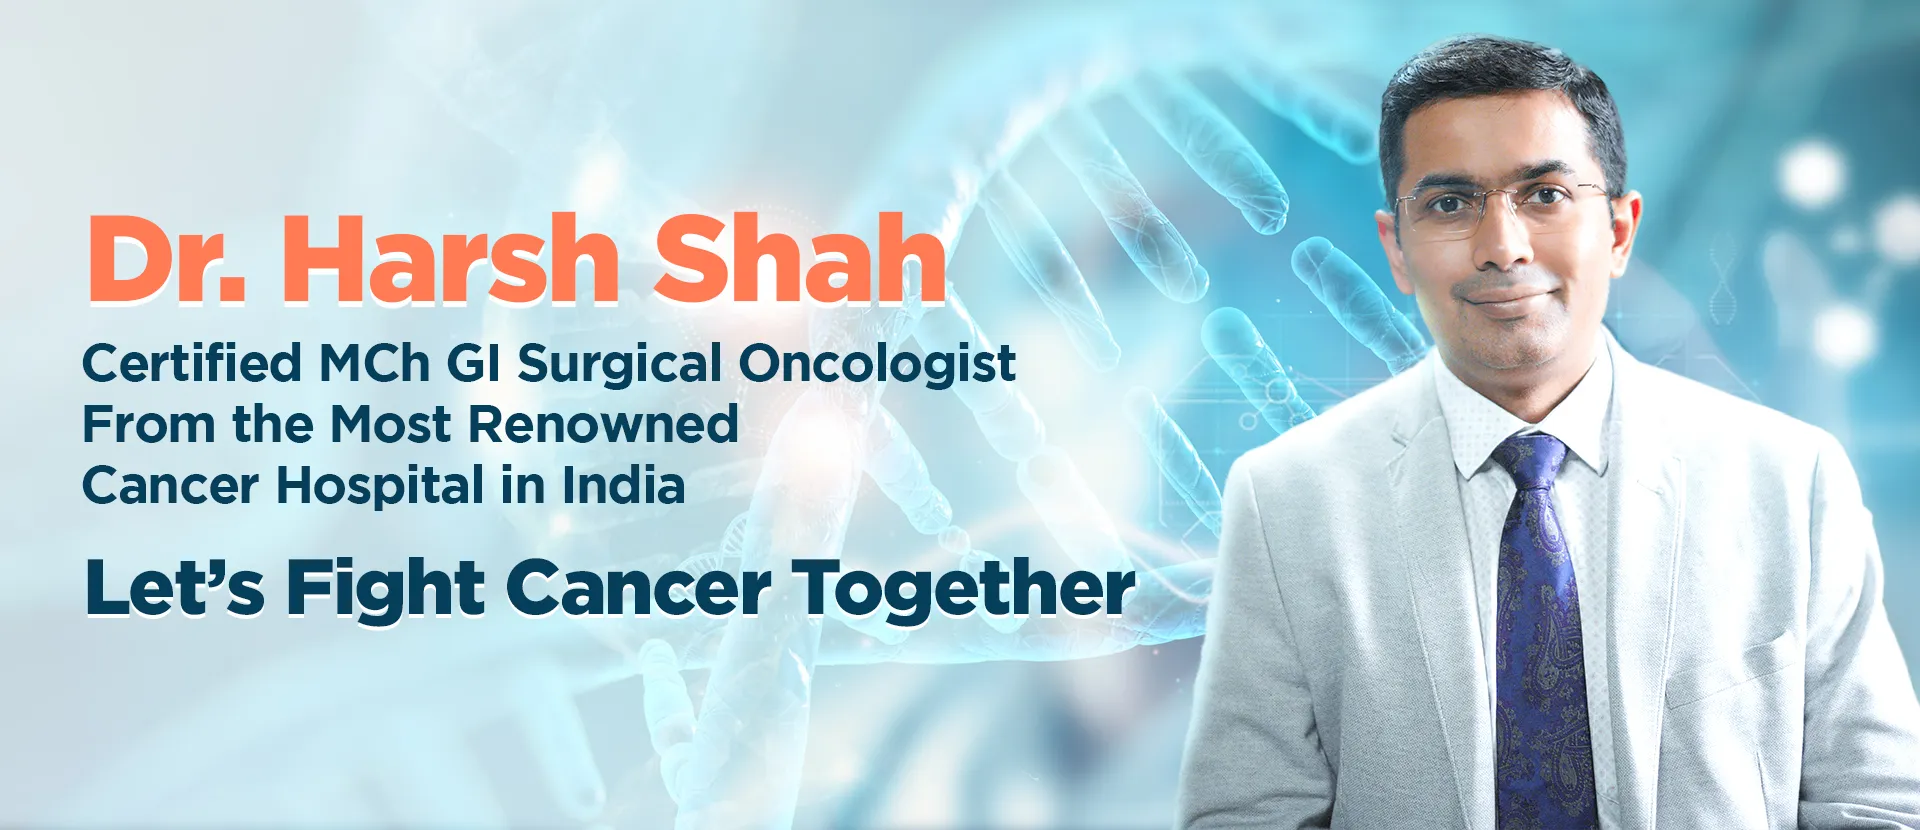 onco surgeon for cancer